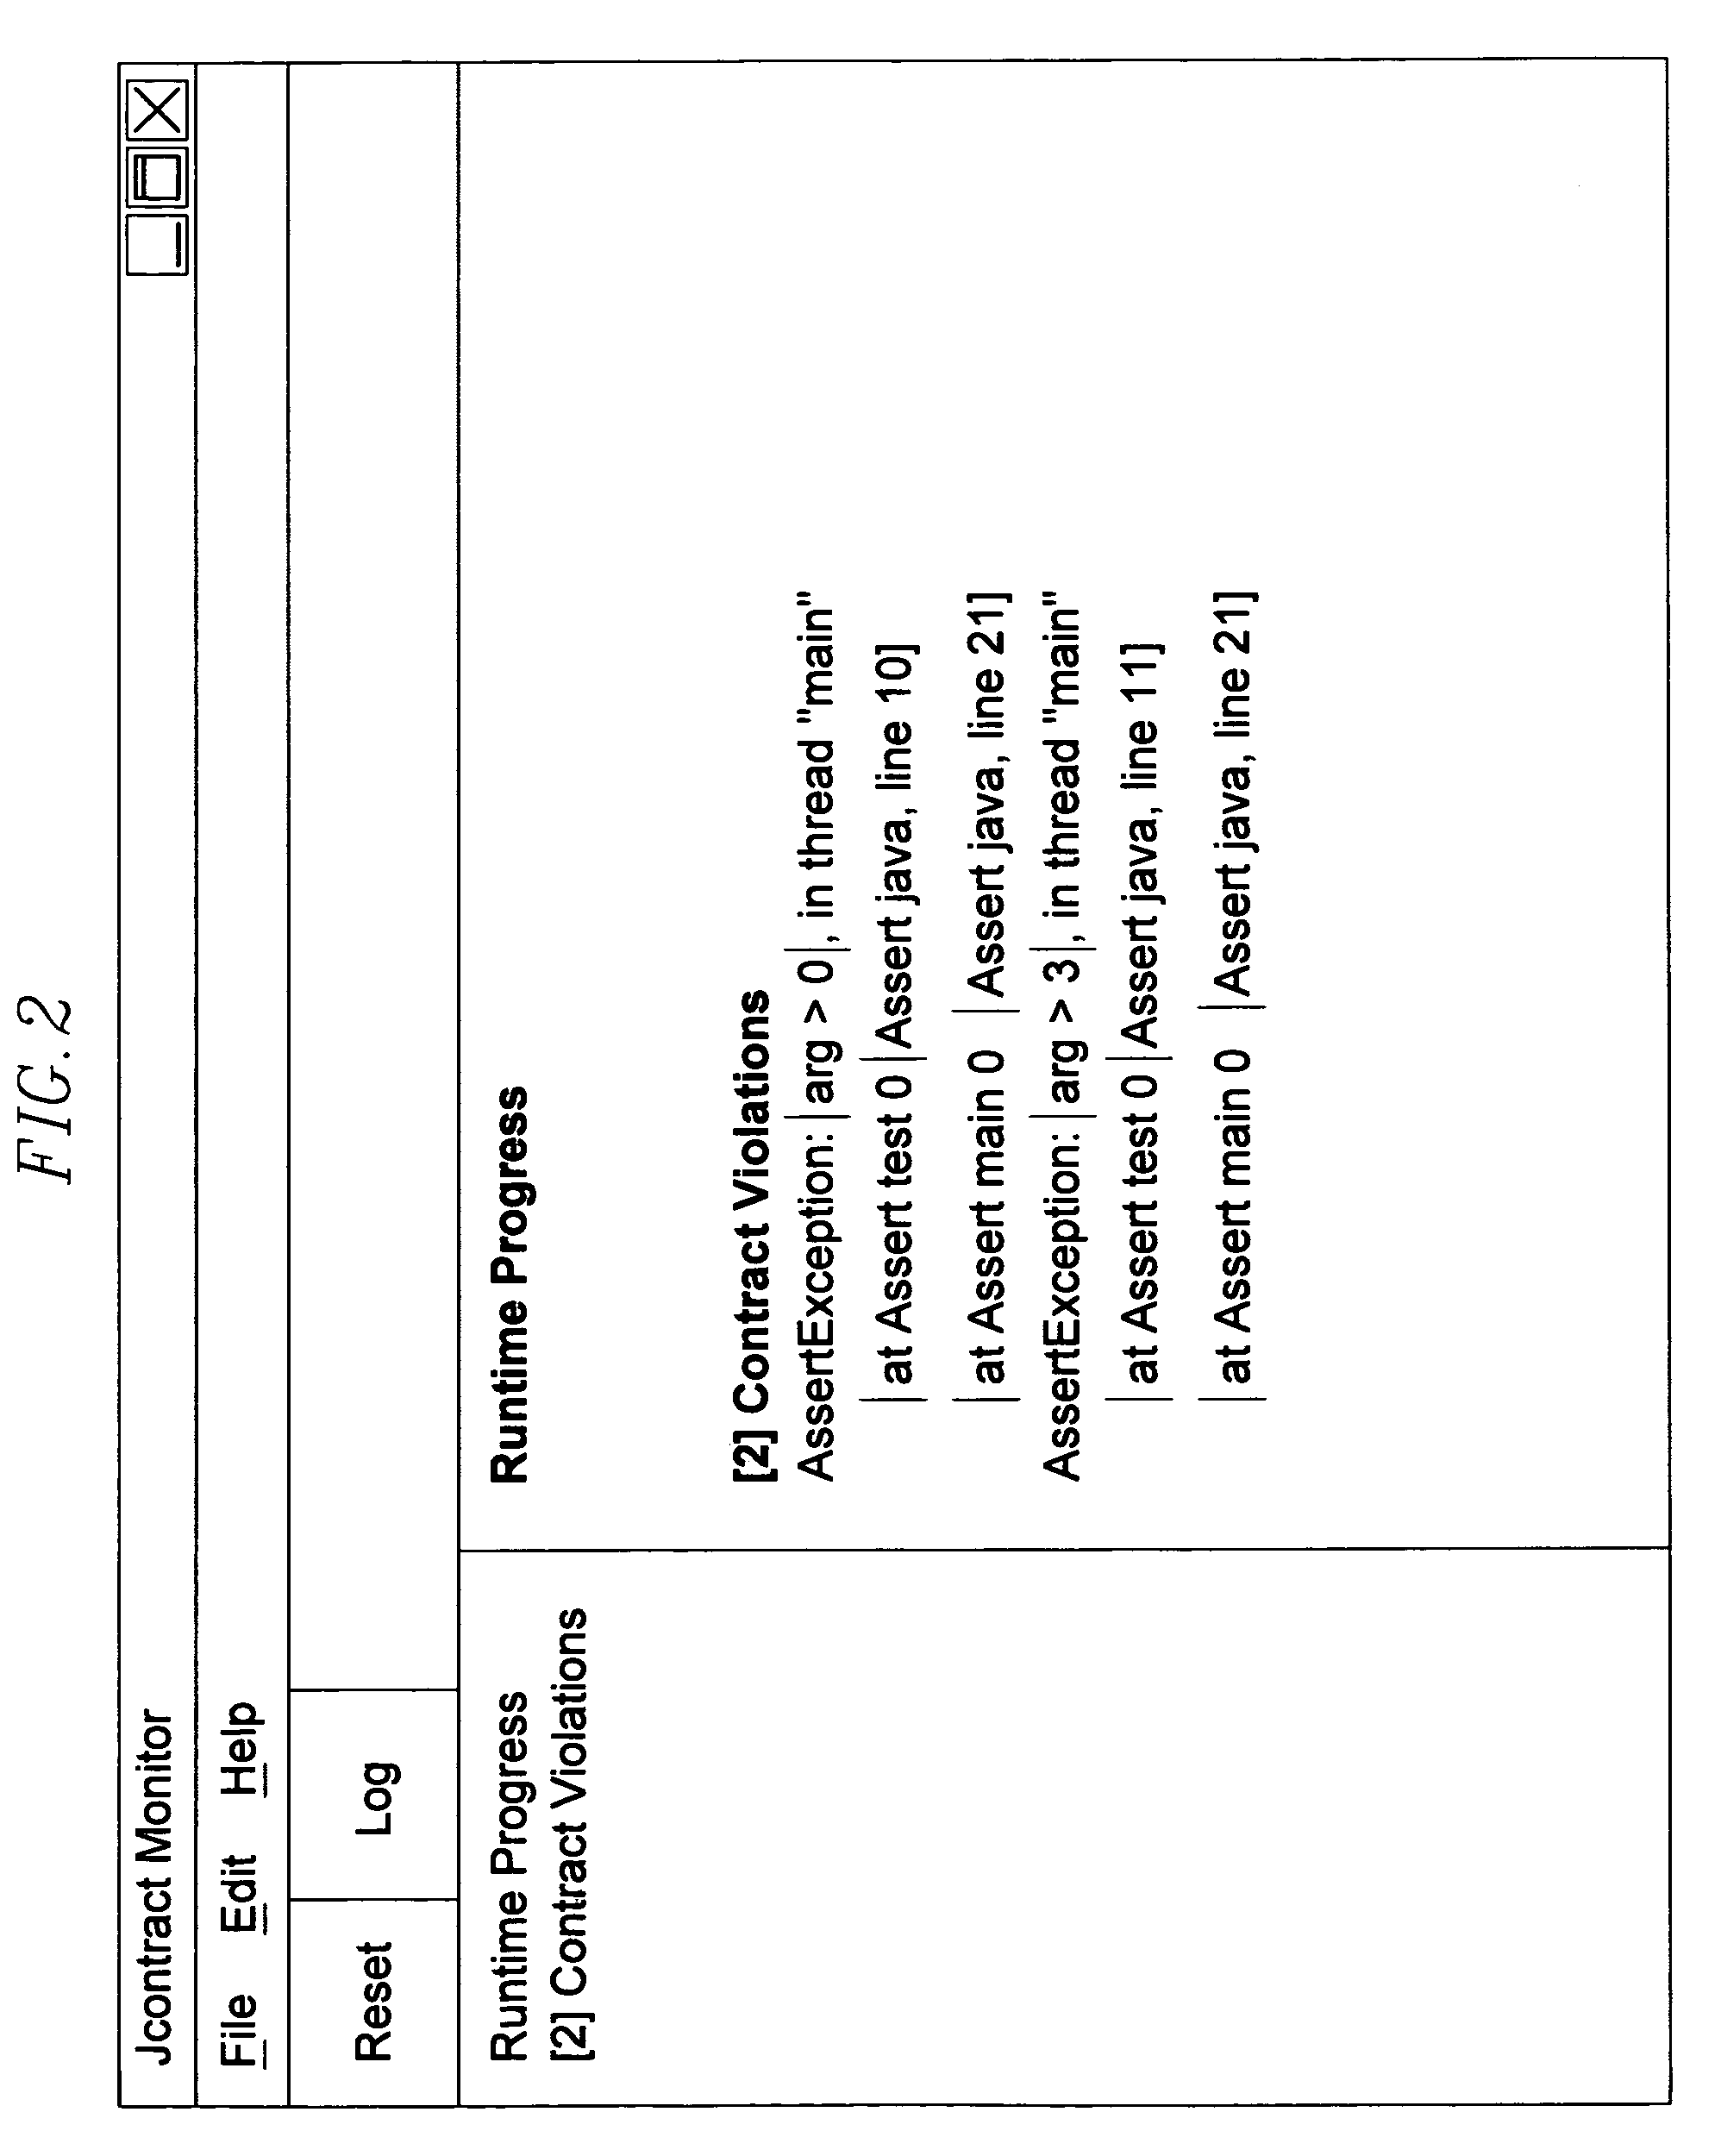 Method and system for dynamically invoking and/or checking conditions of a computer test program